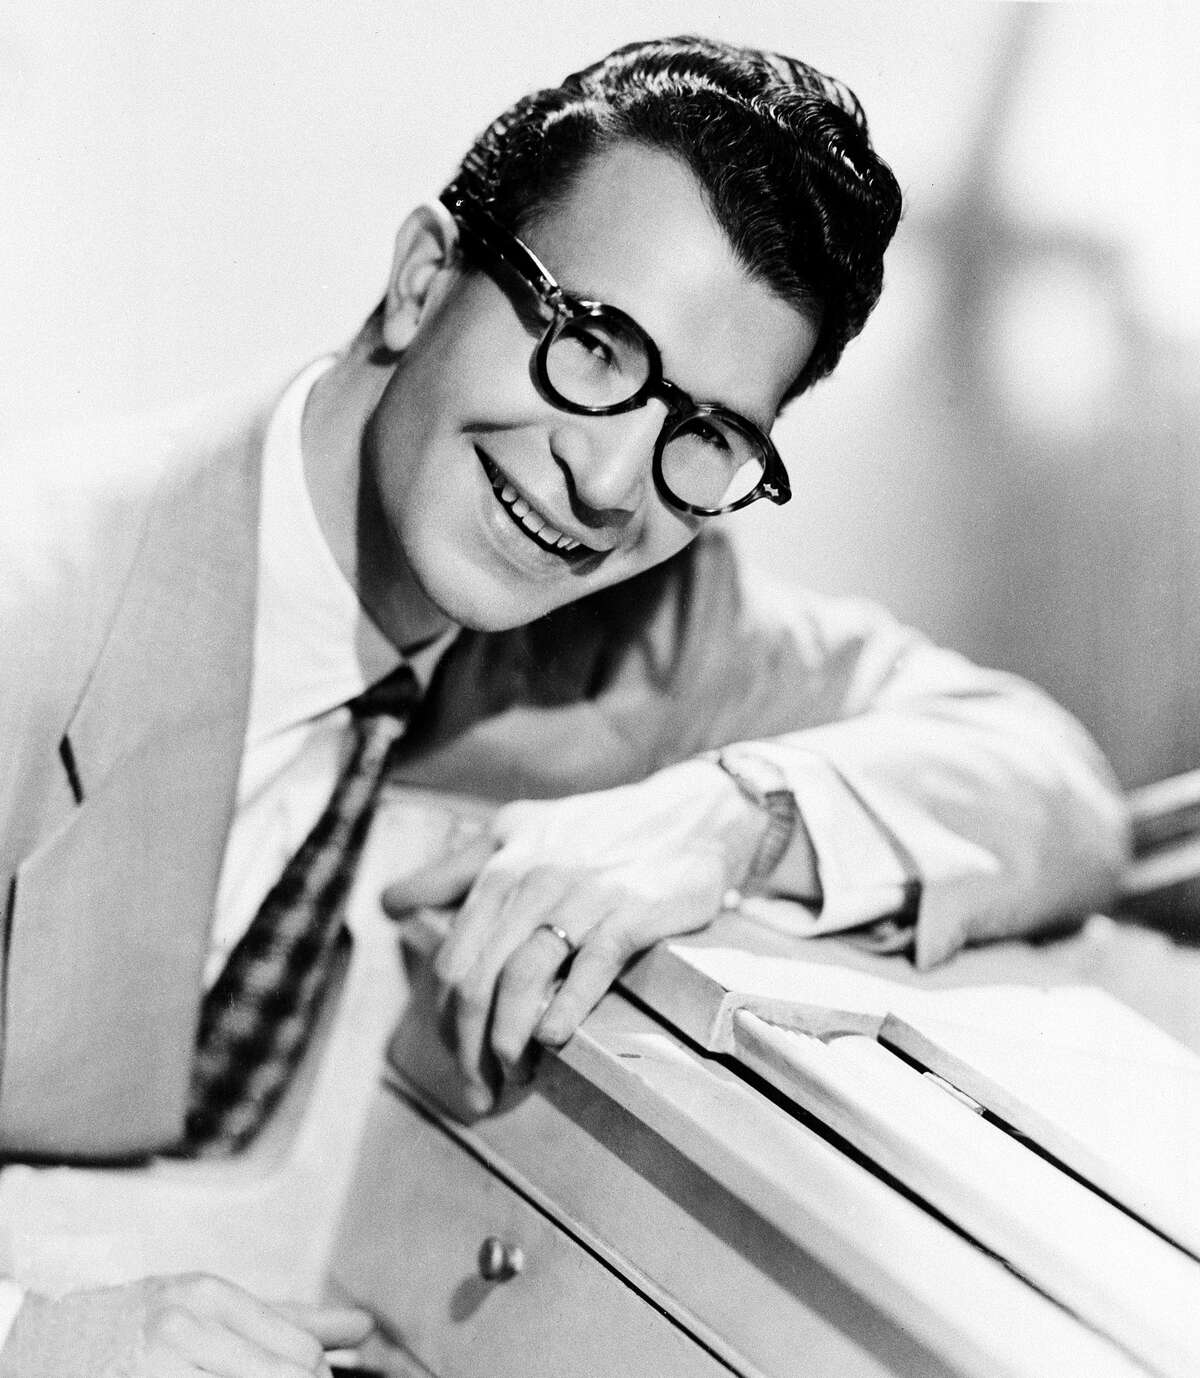 The late jazz pianist Dave Brubeck is one of the musicians highlighted in the Fairfield Museum & History Center's new exhibition, "Fairfield's Rockin' Top Ten." On view through April 28, the exhibition celebrates 10 musicians or musical acts that have contributed to the rich musical legacy of the greater Fairfield area.